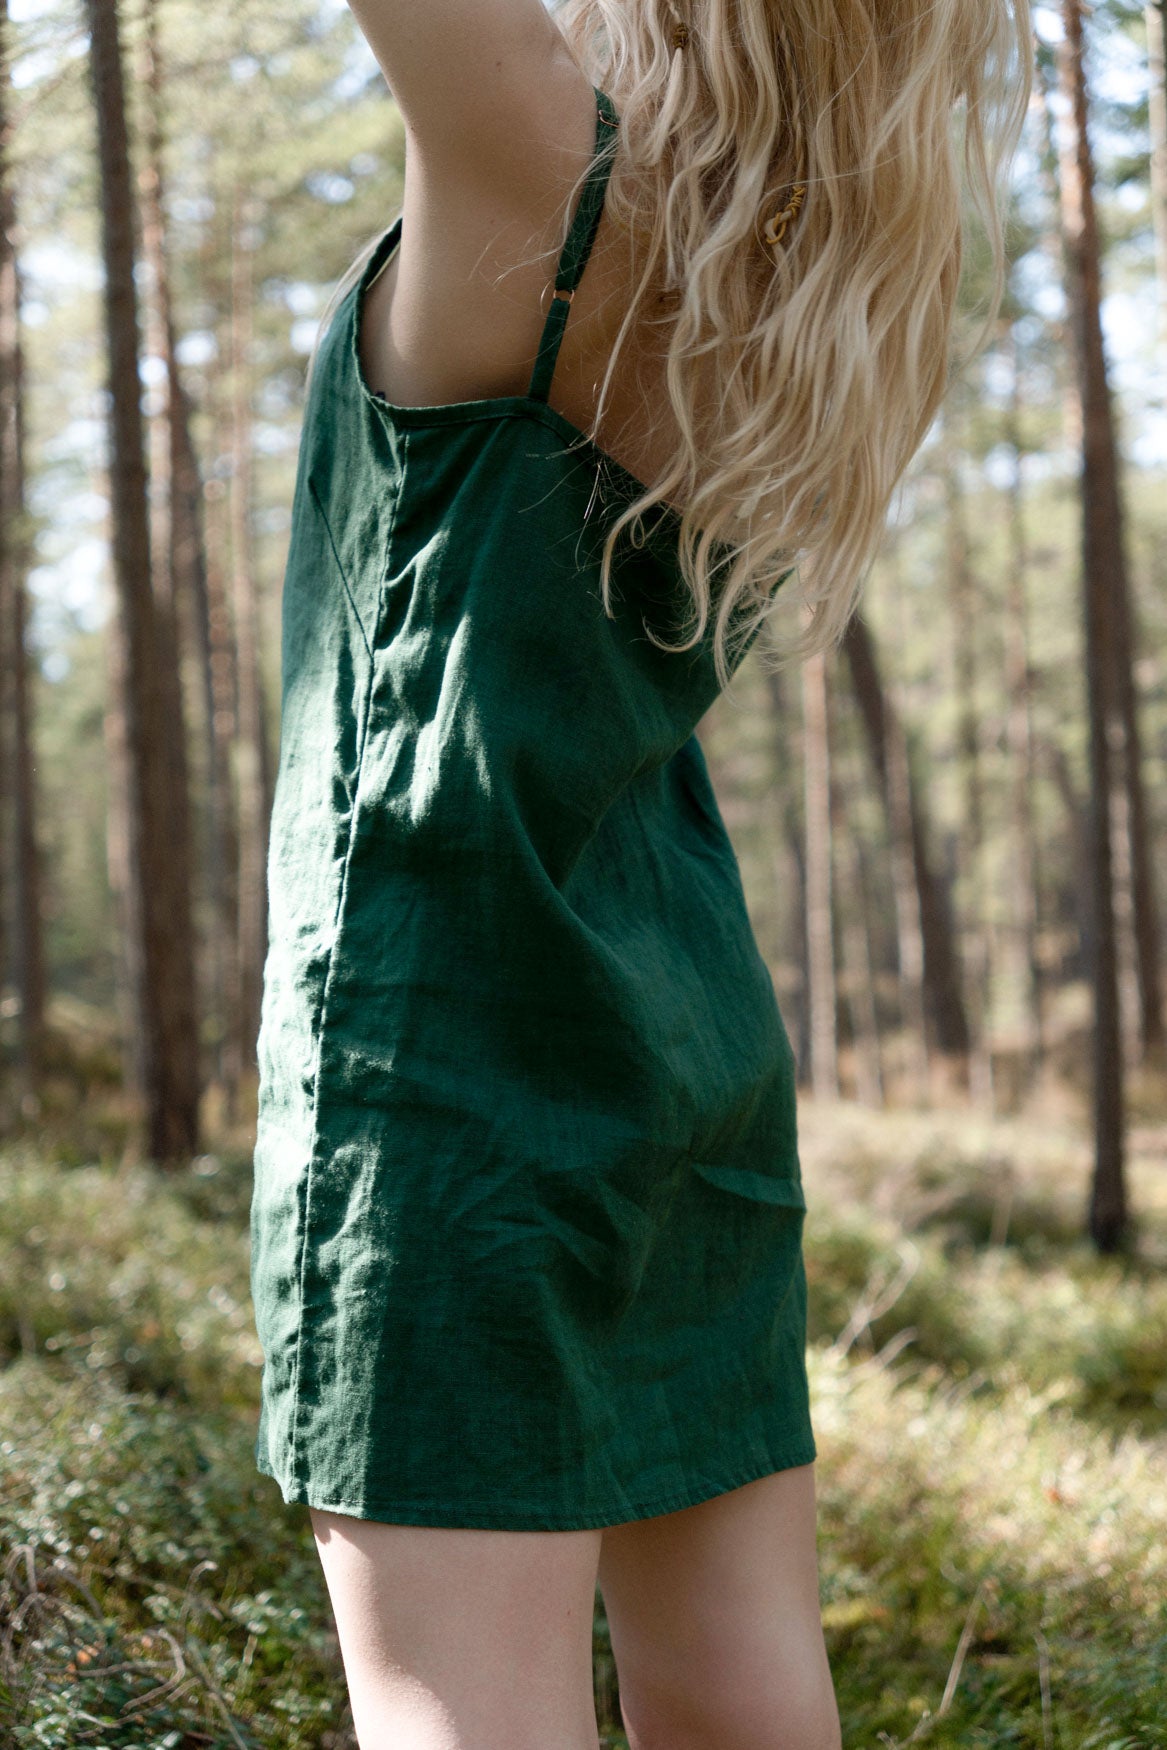 Organic, sustainable and sexy at the same time! Agasåga green short natural linen slip dress, nightdress with straps. This sleepwear is natural, soft, breathable and pure. It’s a conscious and healthy choice for your body and environment that embraces genuine selflove and selfcare. Handmade with love in the North.